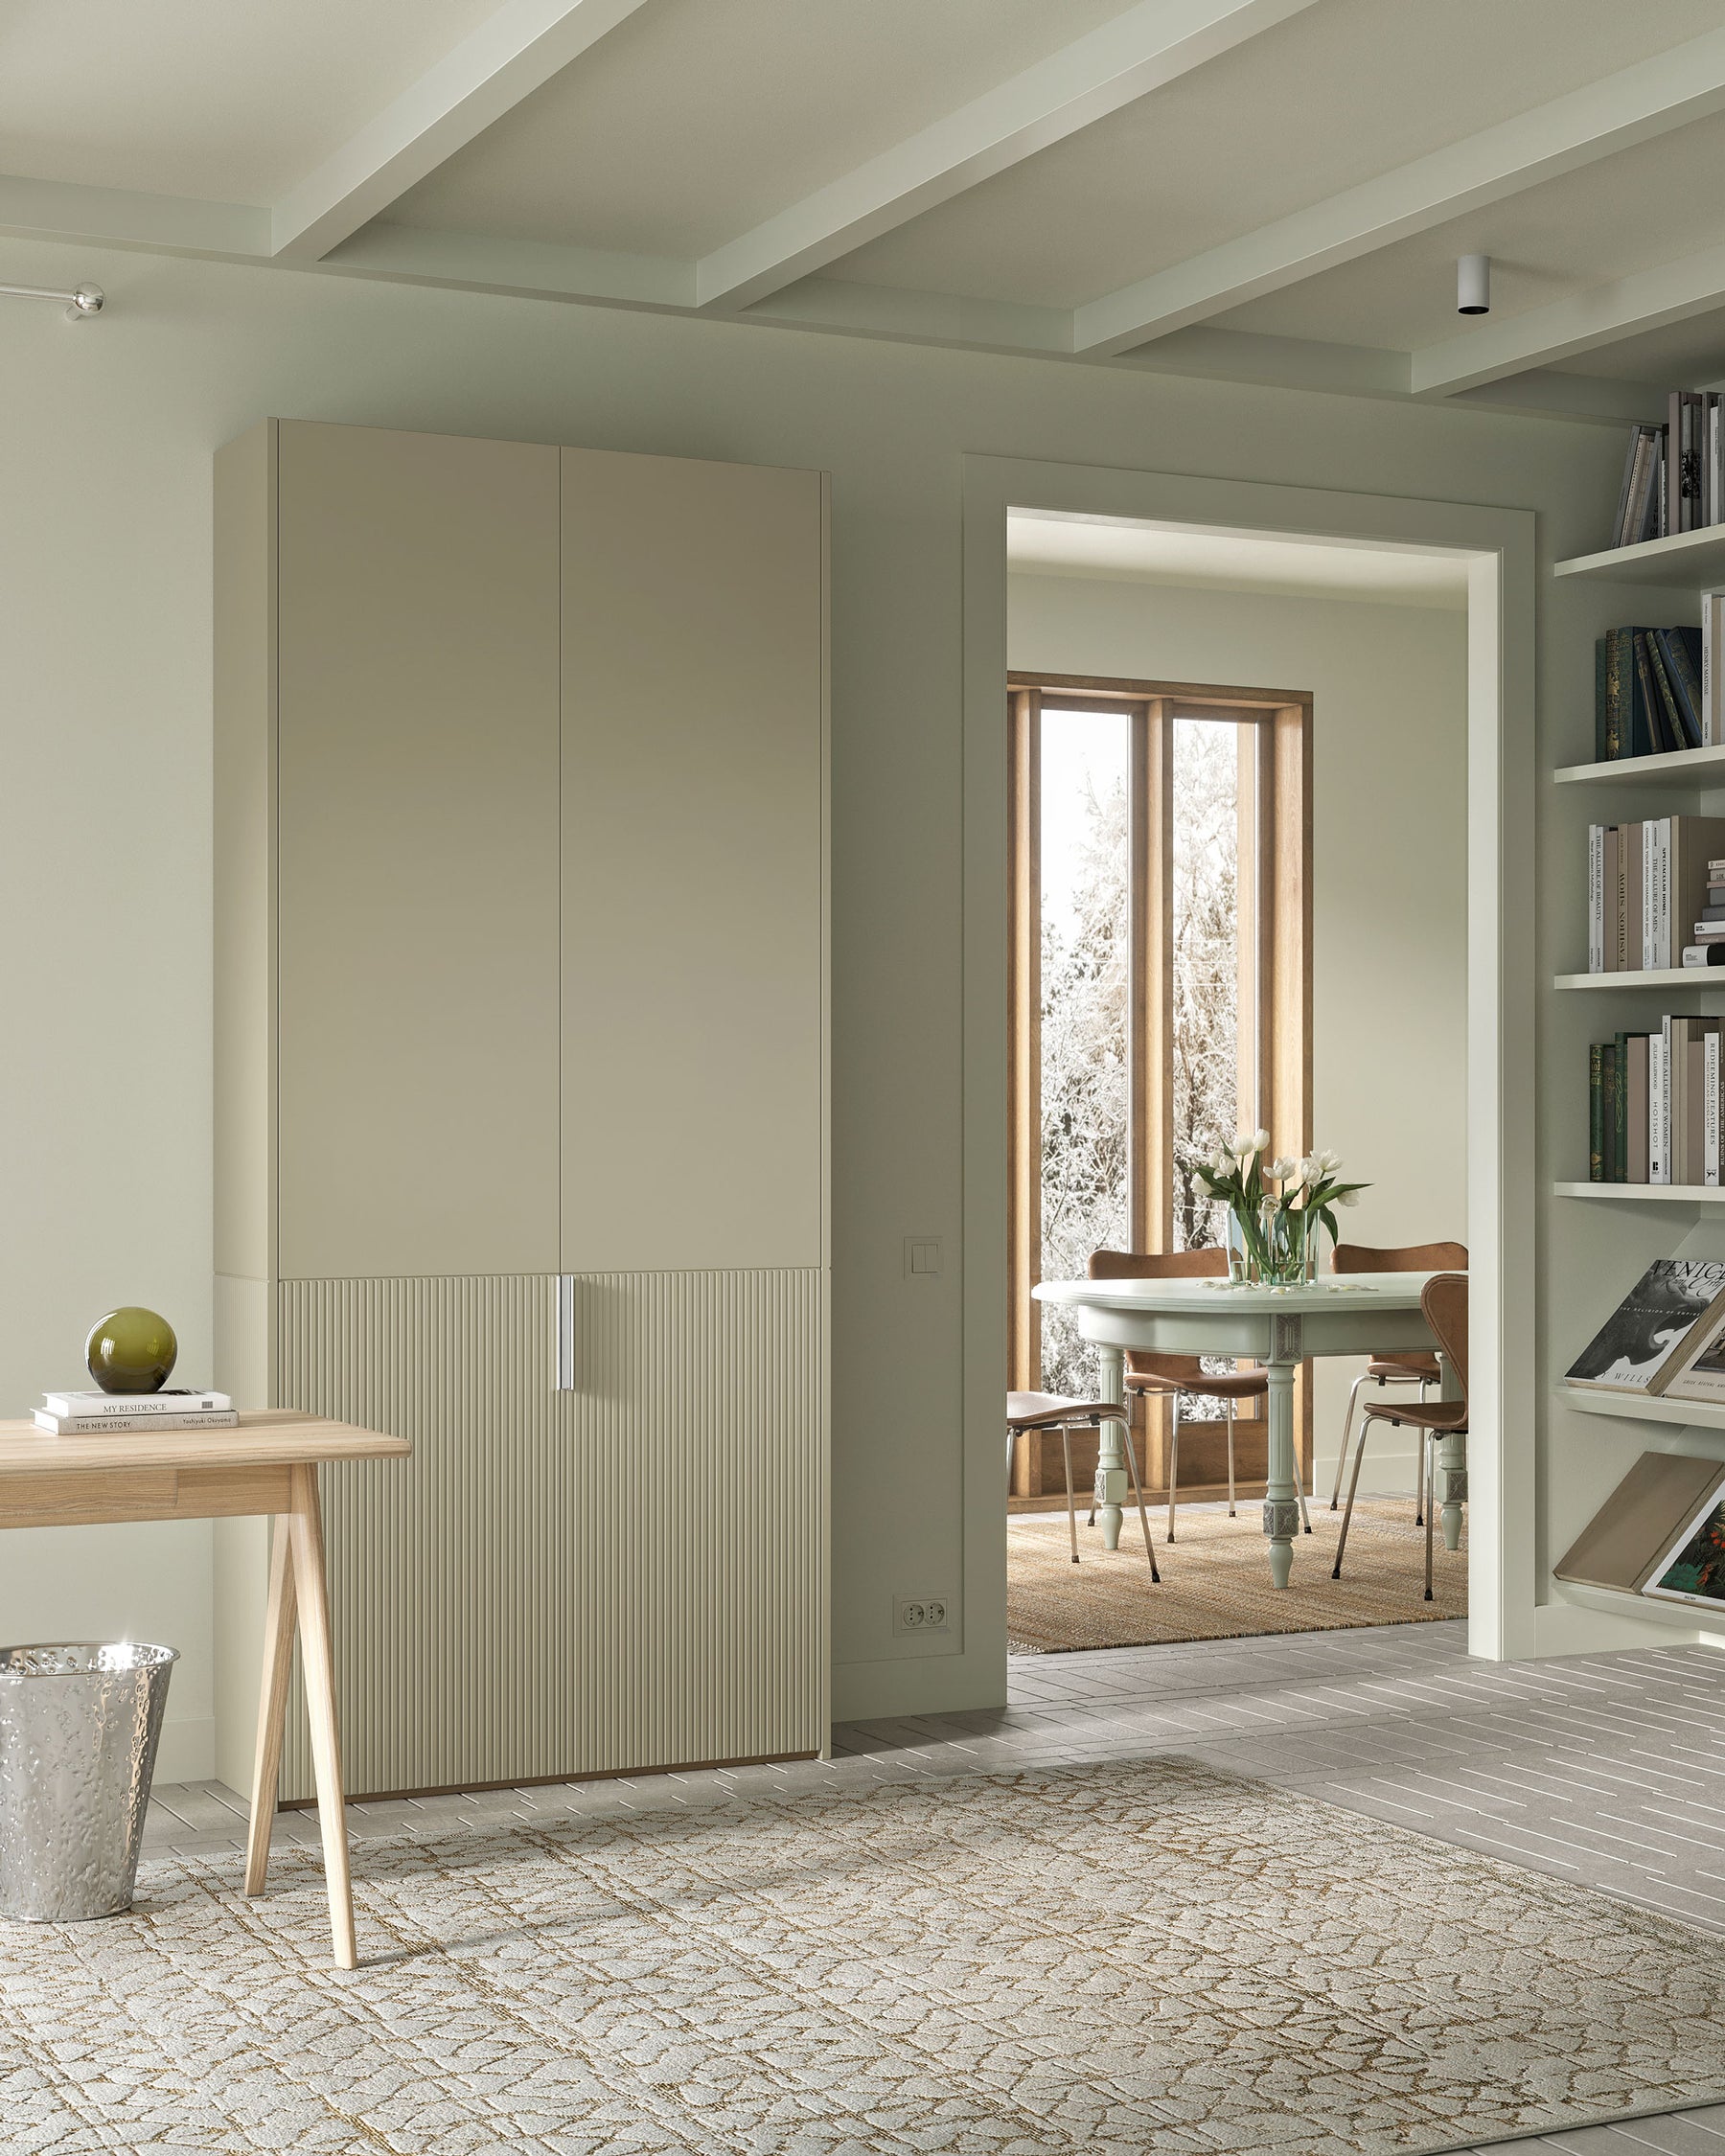 A.S.Helsingö Vass wardrobe in ash green color with IKEA PAX